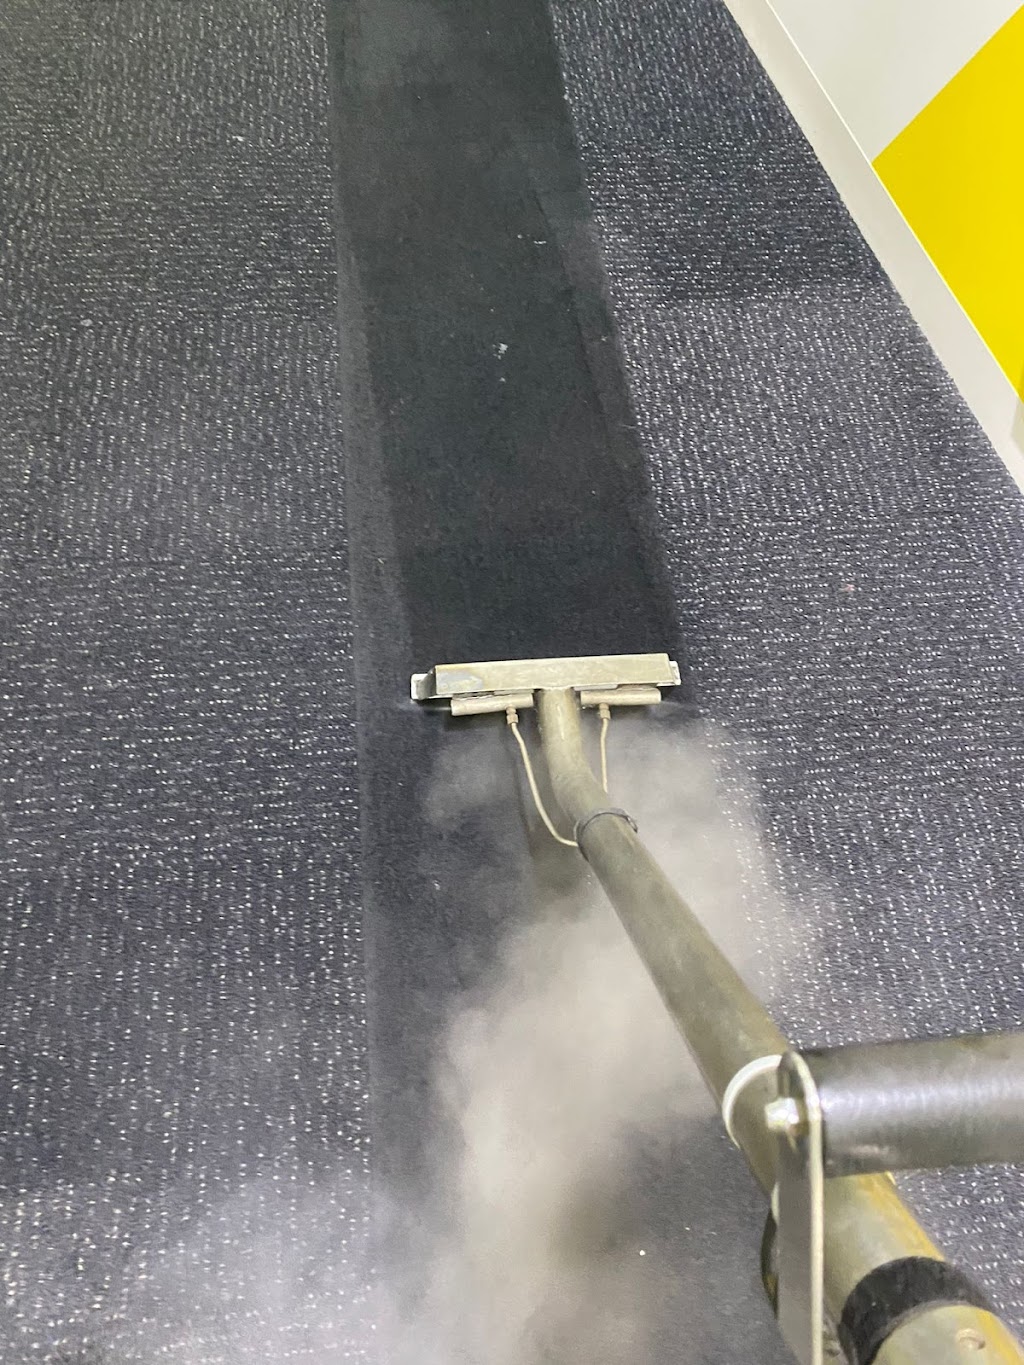 Clean heaven commercial and residential carpet cleaning | Shakespeare St, Traralgon VIC 3844, Australia | Phone: 0444 555 375